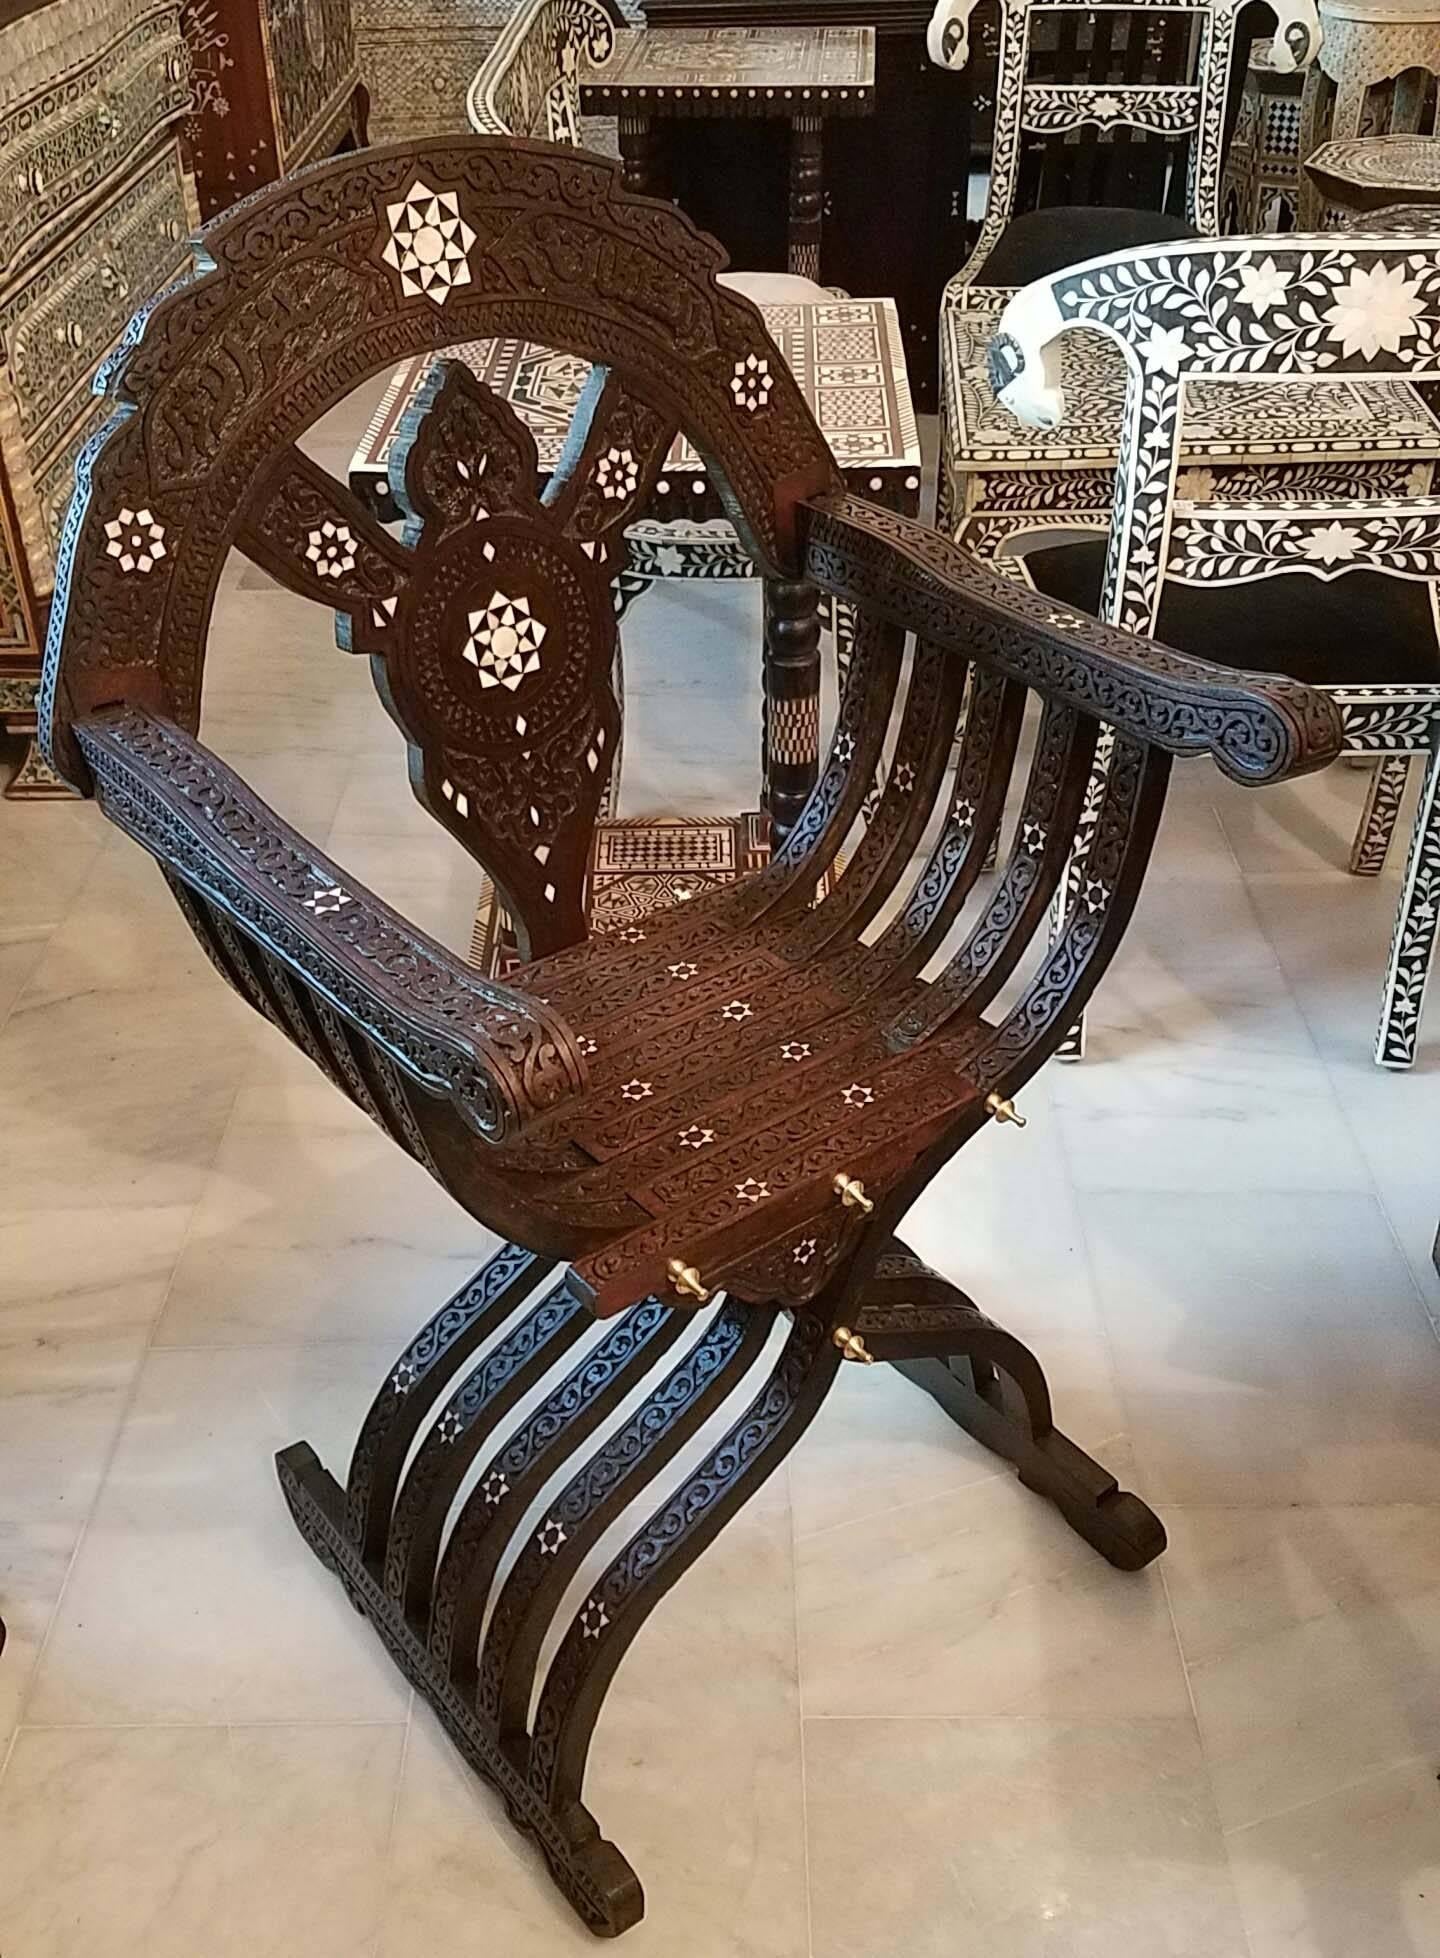 Mother-of-pearl Syrian Style Chairs Walnut Wood In Excellent Condition For Sale In Orlando, FL